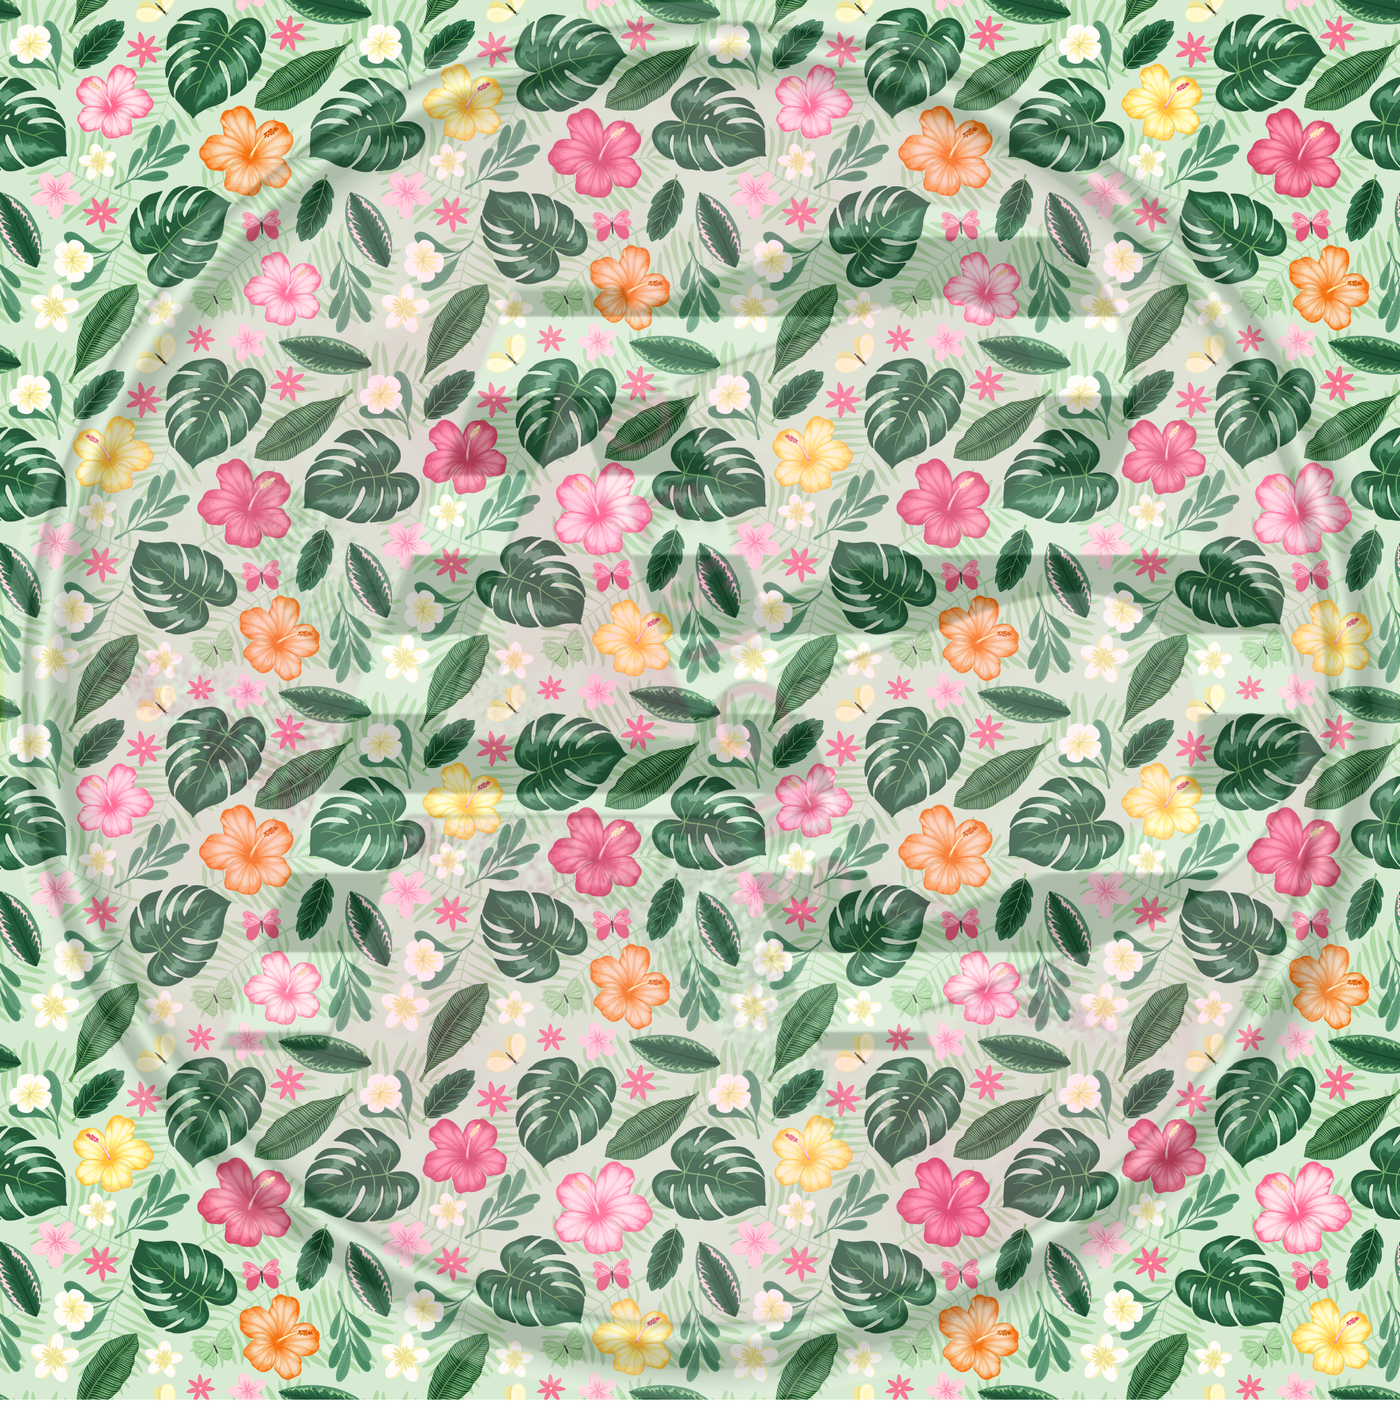 Adhesive Patterned Vinyl - Tropical Exotic Floral 39 SMALLER